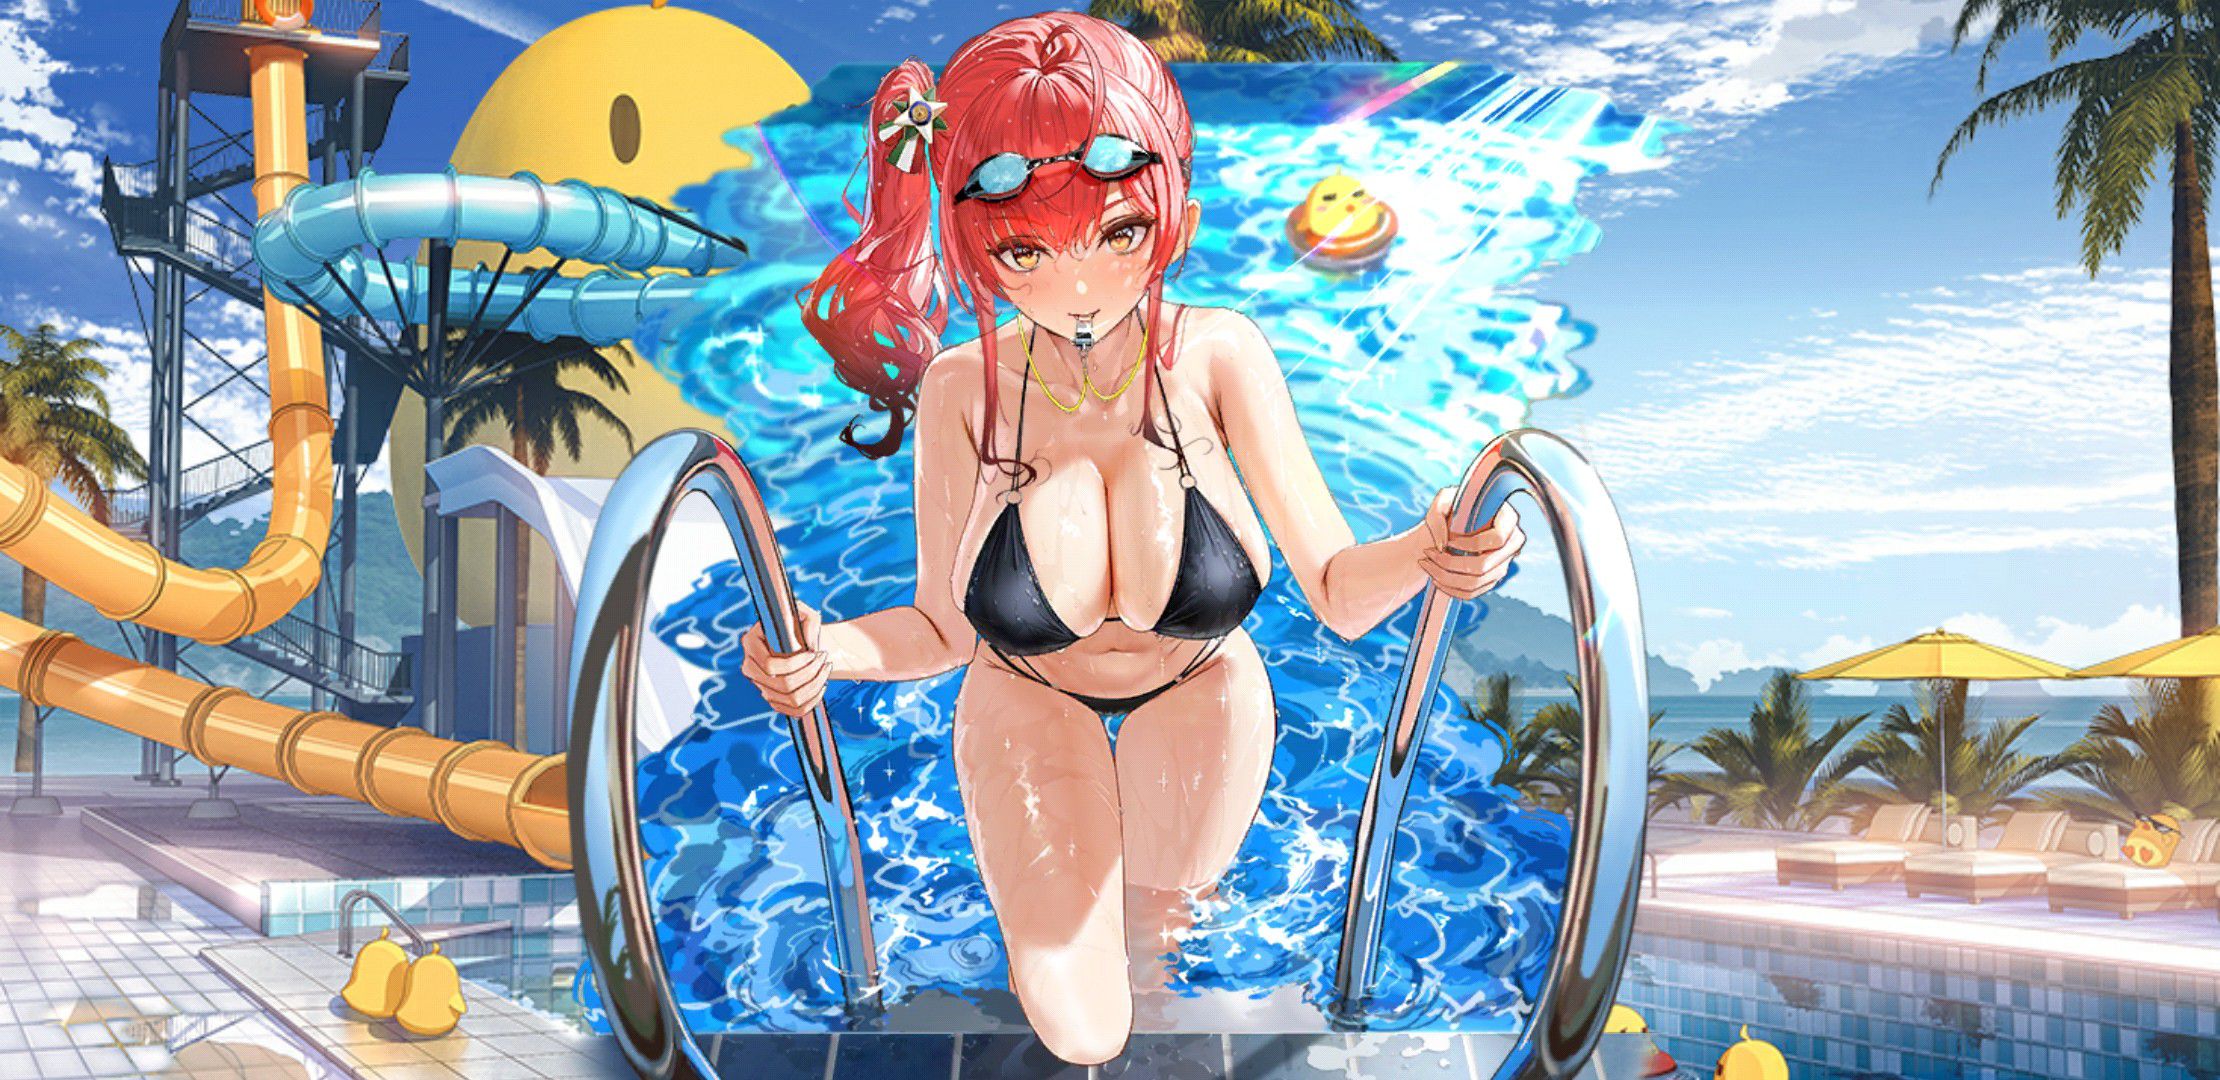 【There is an image】 Smartphone that urges charging with erotic swimsuits is malicious 29